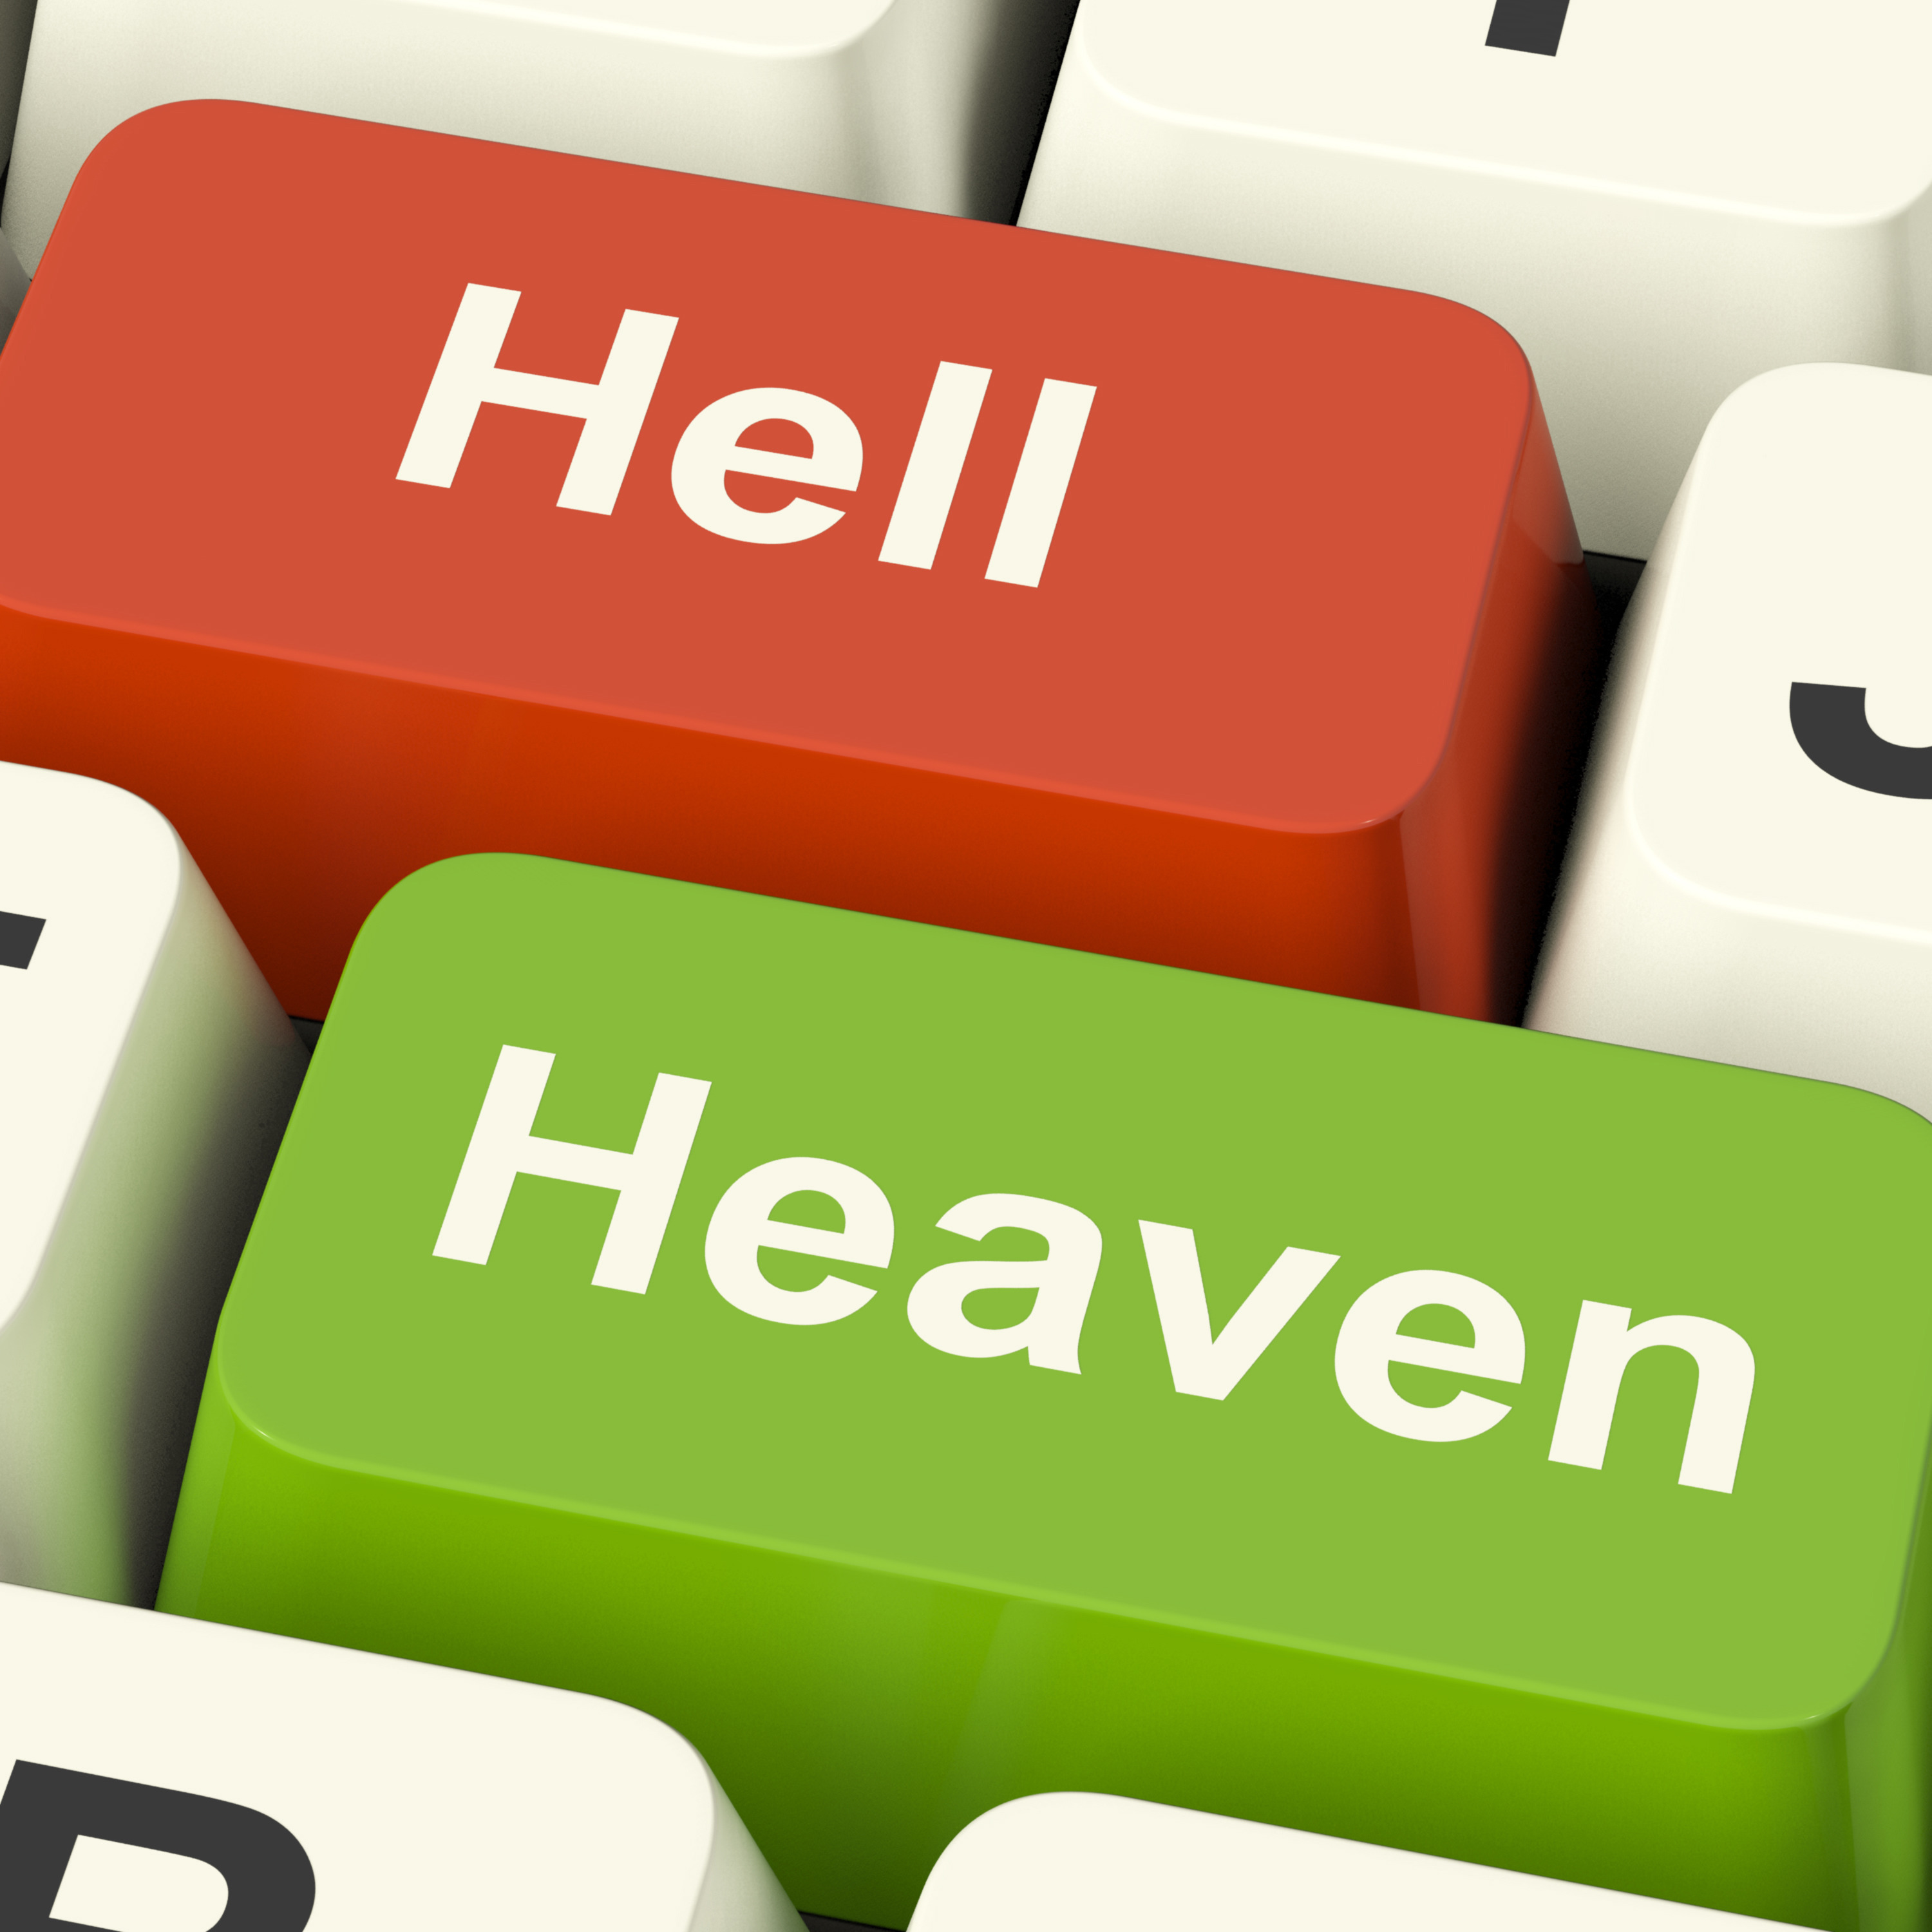 Heaven Hell Computer Keys Showing Choice Between Good And Evil Online